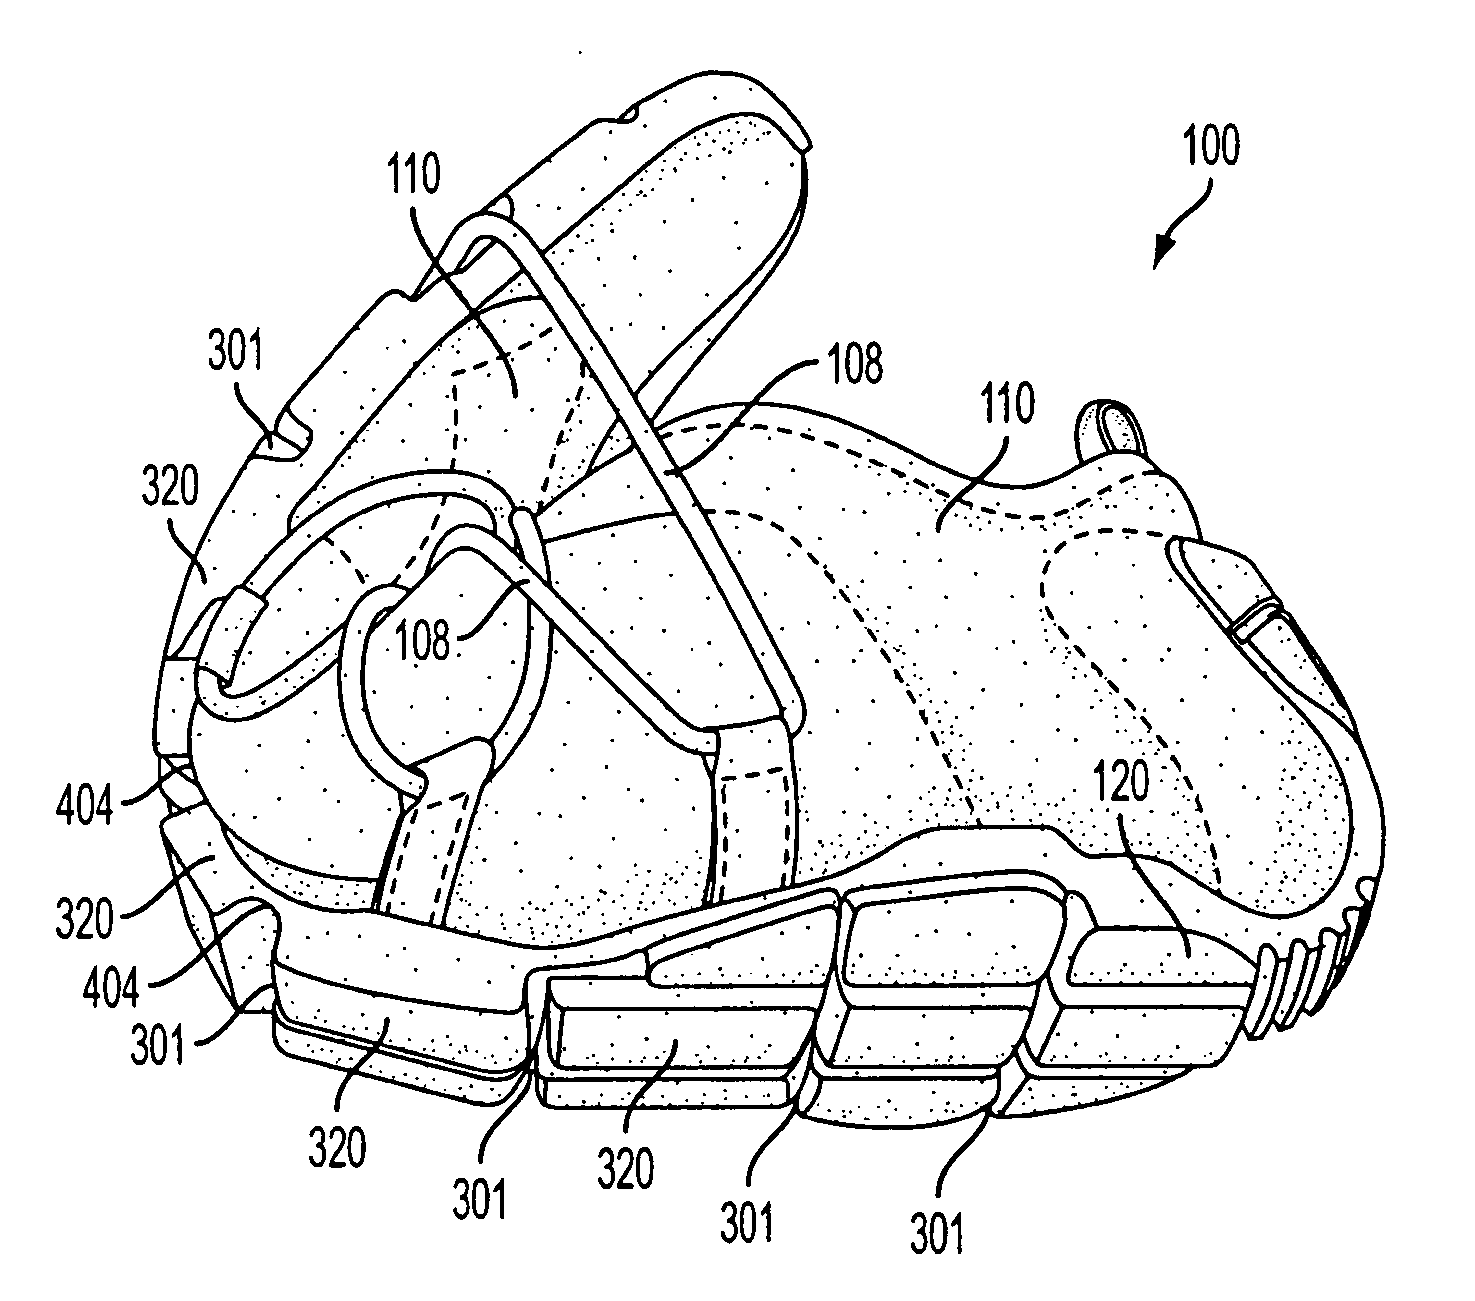 Collapsible shoe